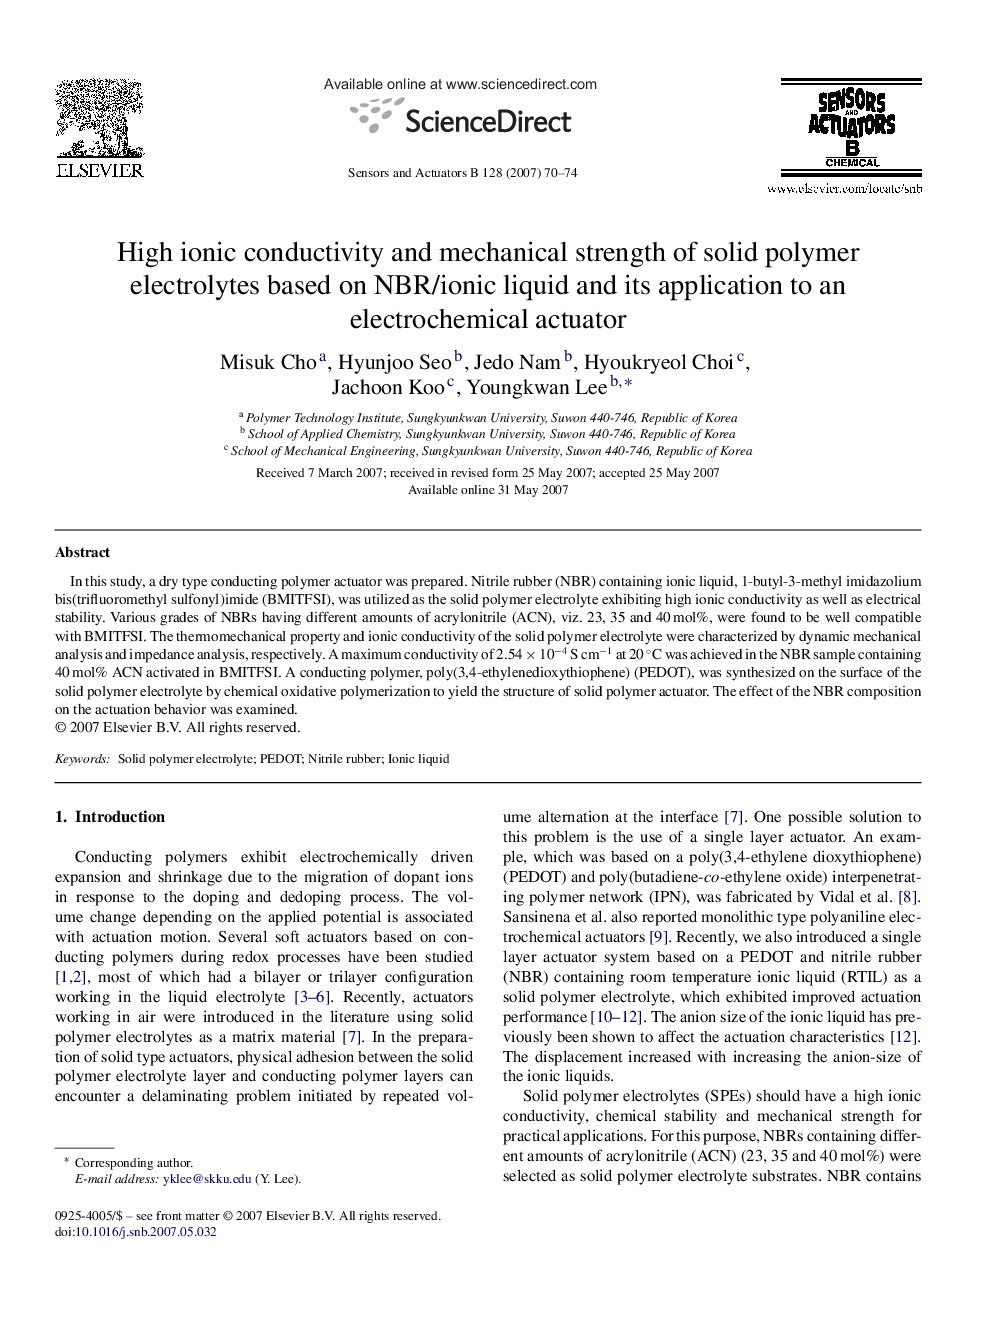 High ionic conductivity and mechanical strength of solid polymer electrolytes based on NBR/ionic liquid and its application to an electrochemical actuator